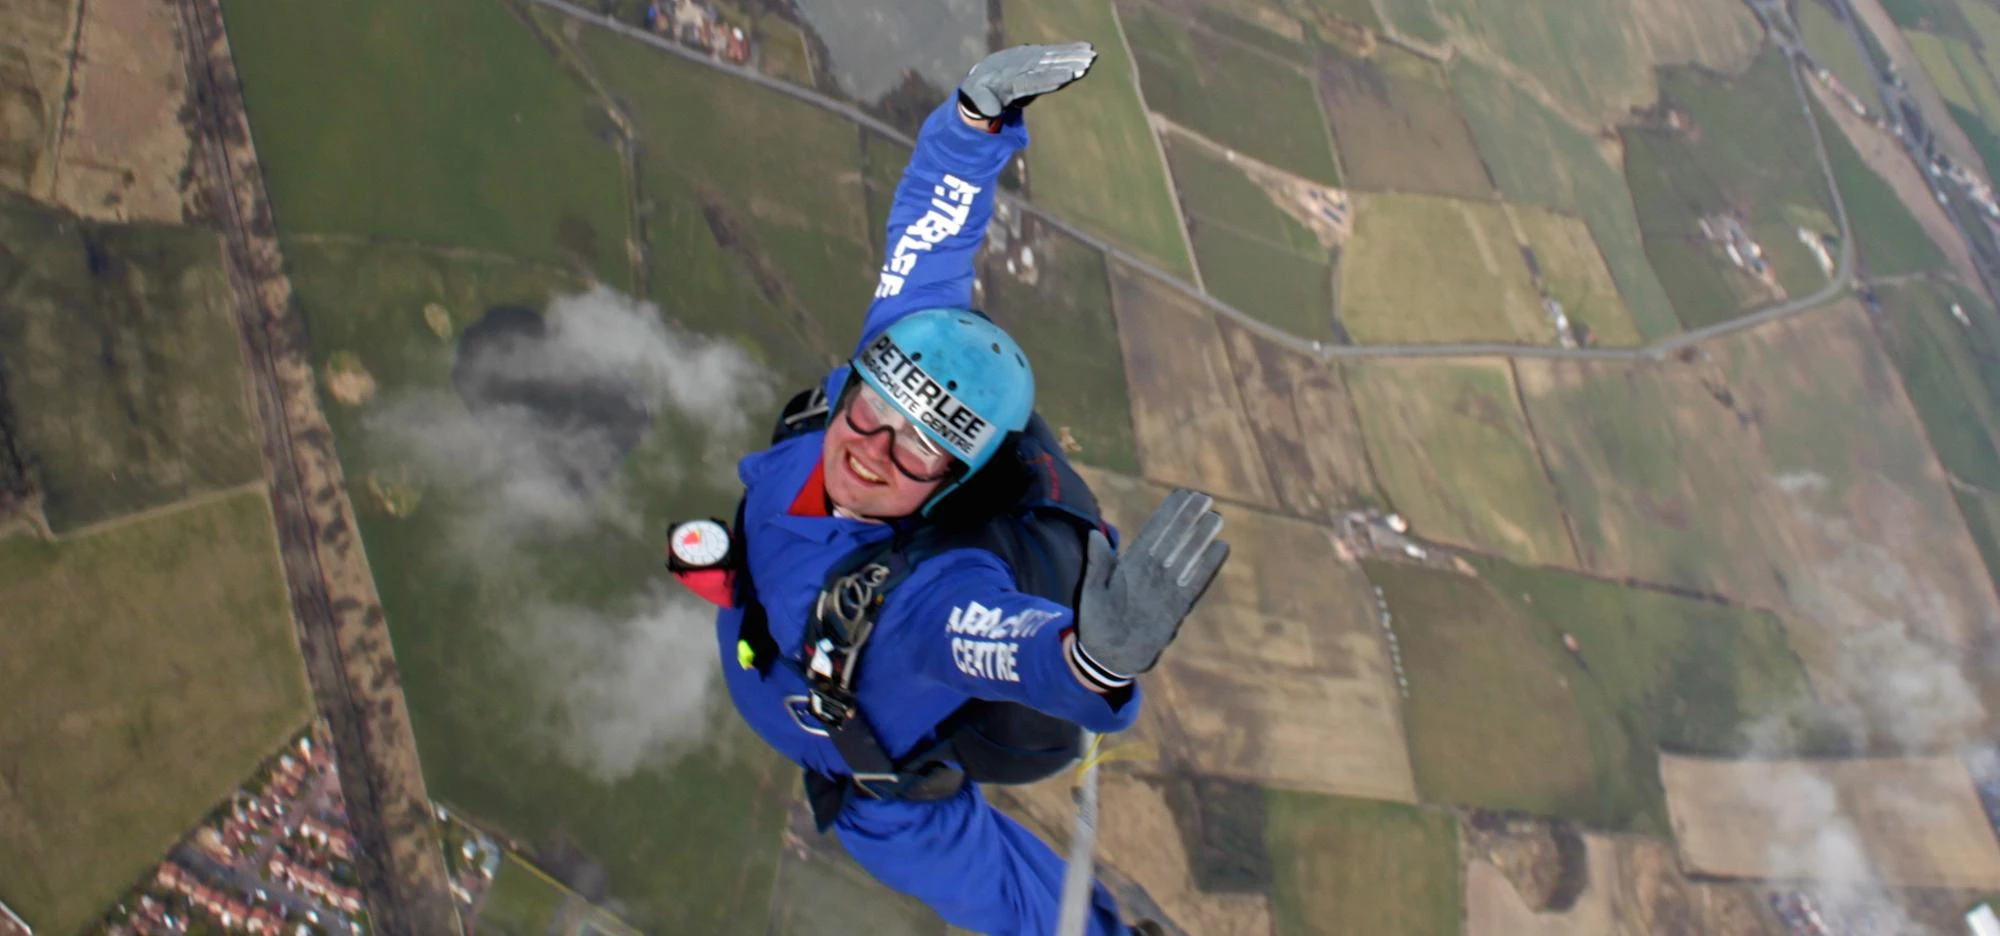 Shotton Skydive Academy is one of this year's Small Business Saturday's Small Biz 100